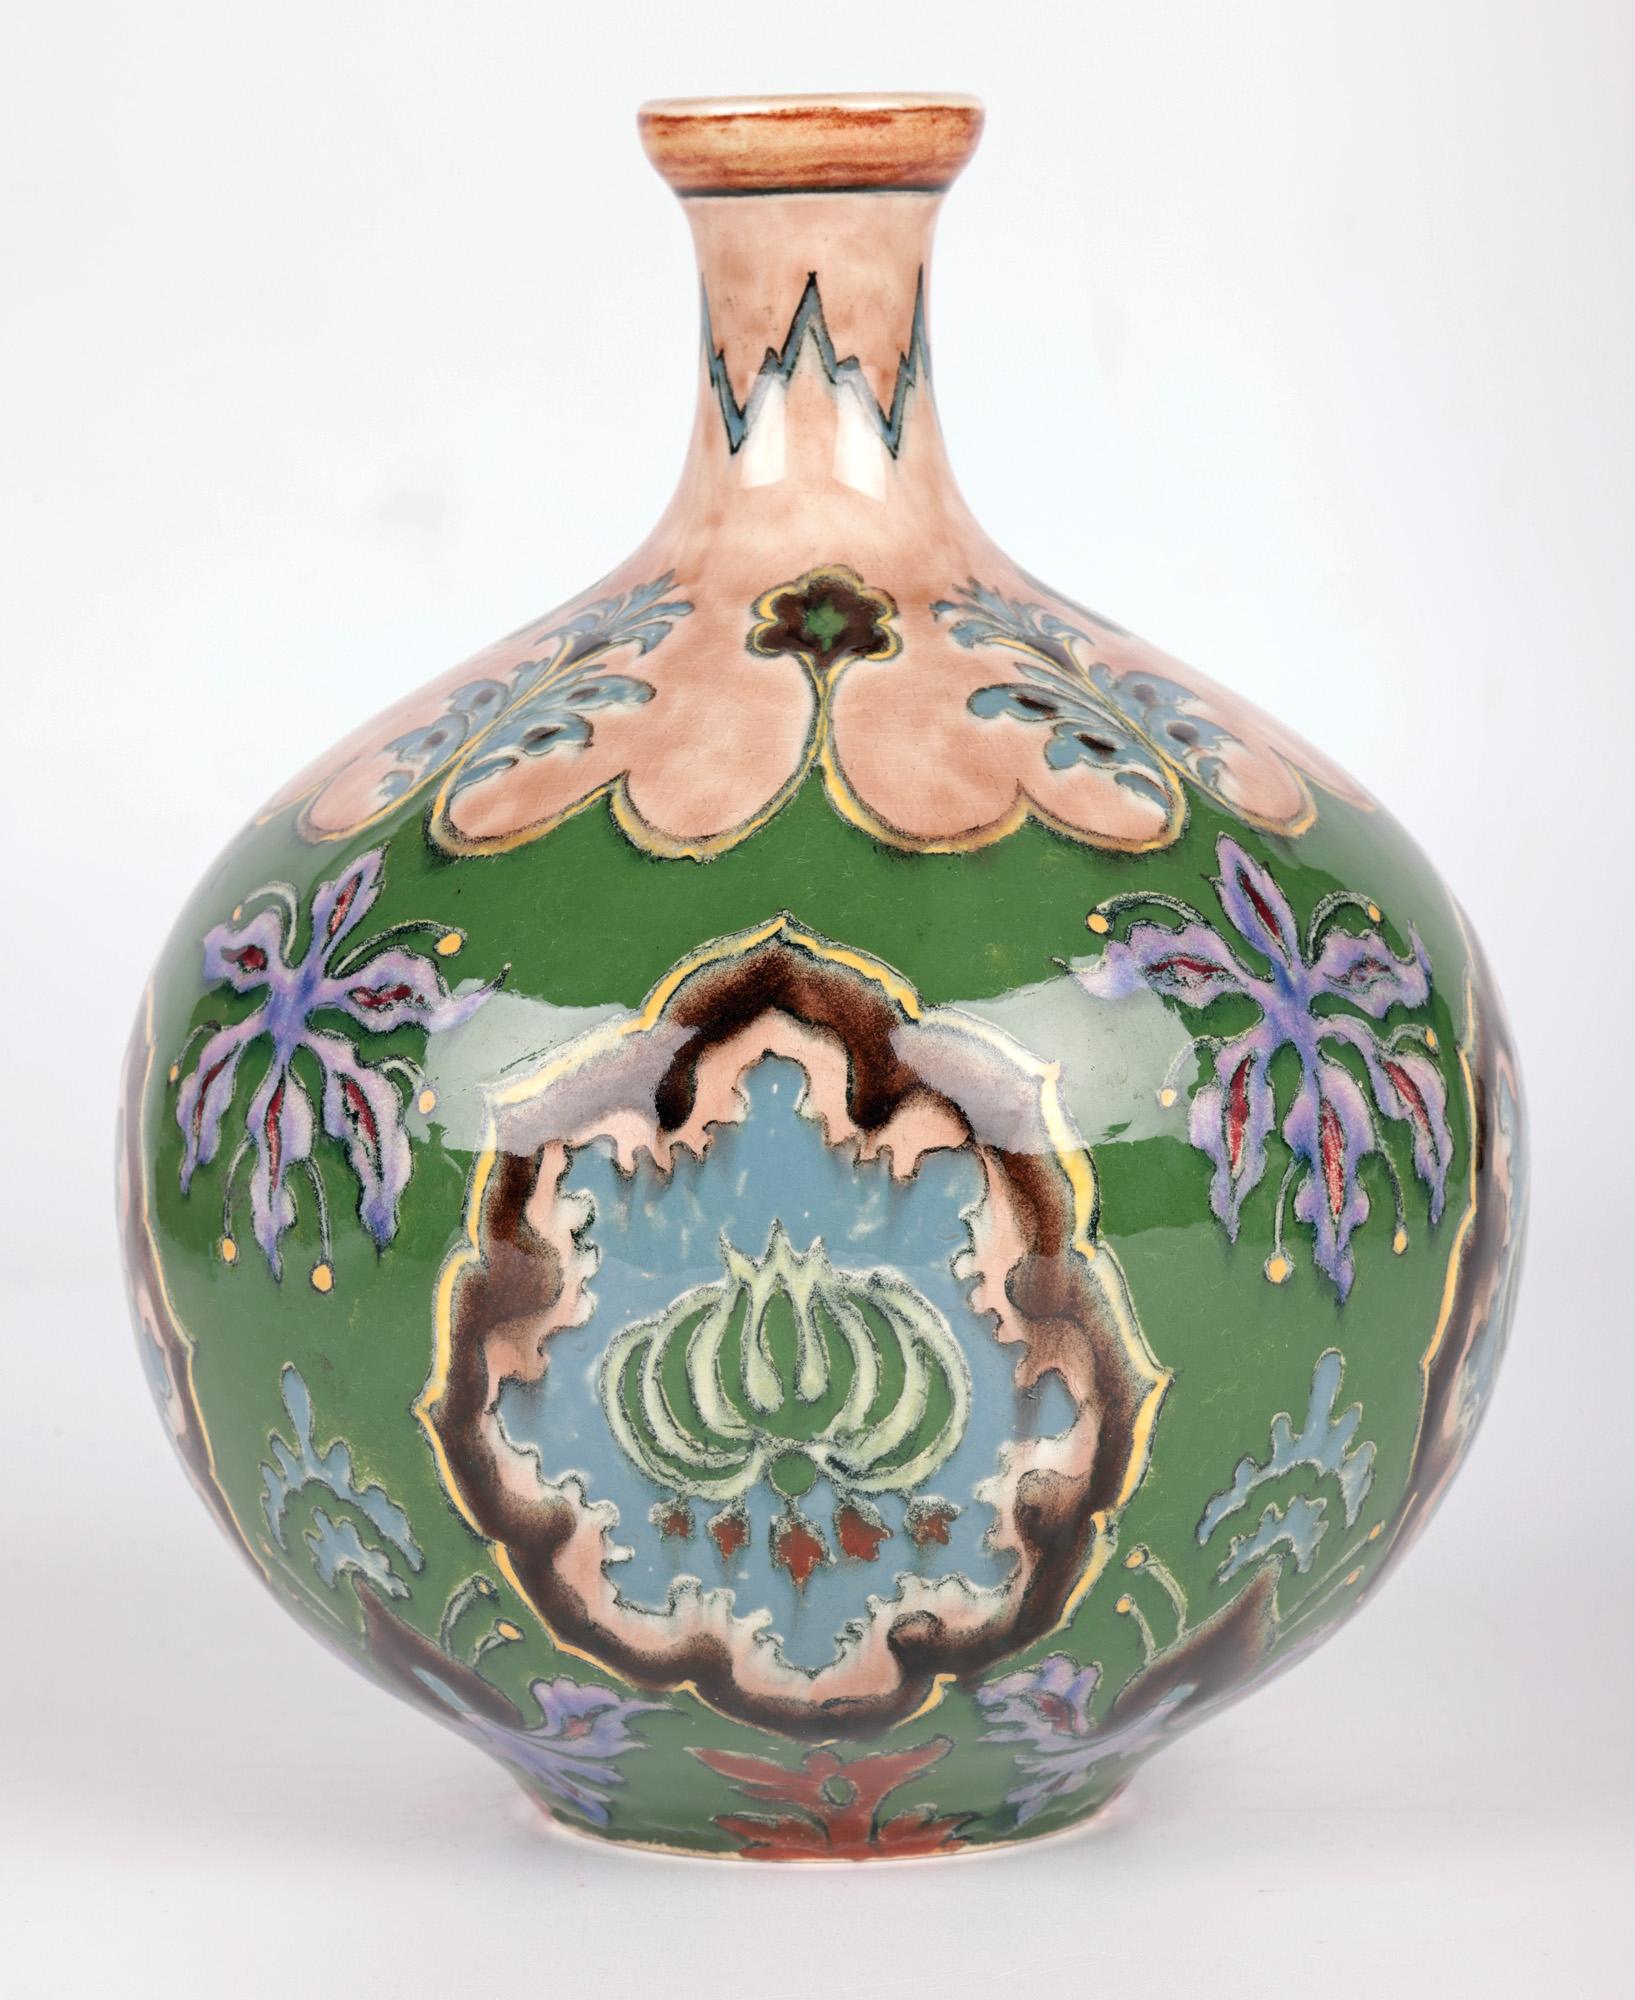 A fine and stunning Art Nouveau German pair of hand painted art pottery vases with floral designs made by the renowned manufactory of Royal Bonn and dating from around 1900. 
Royal Bonn ceramics was founded in 1836 by Franz Anton Mehlem and produced